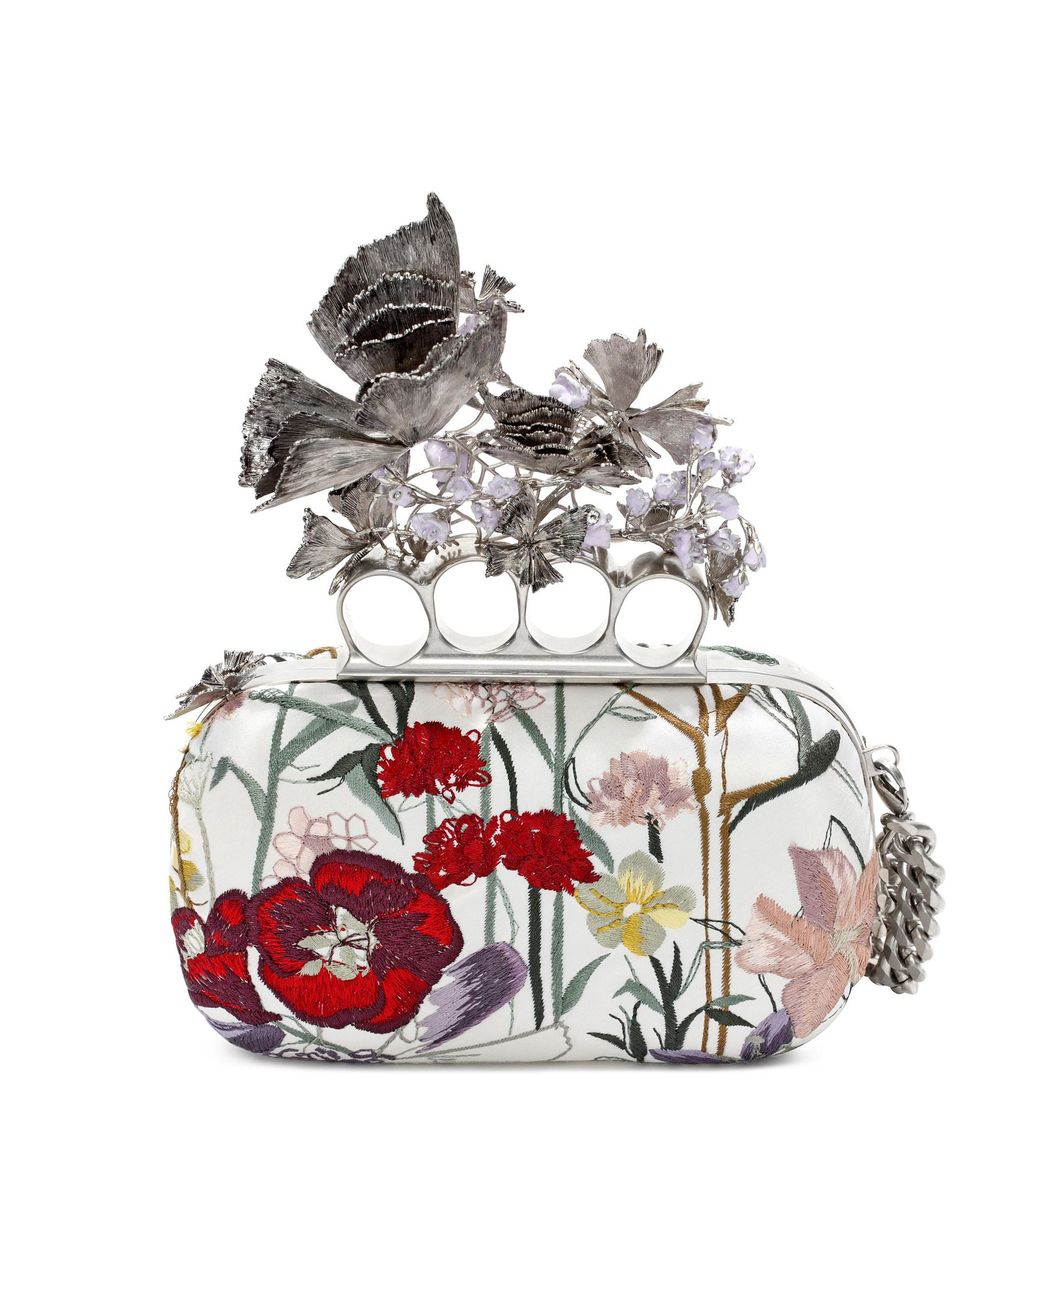 Alexander McQueen Red Lacquered Rose Knucklebox Clutch